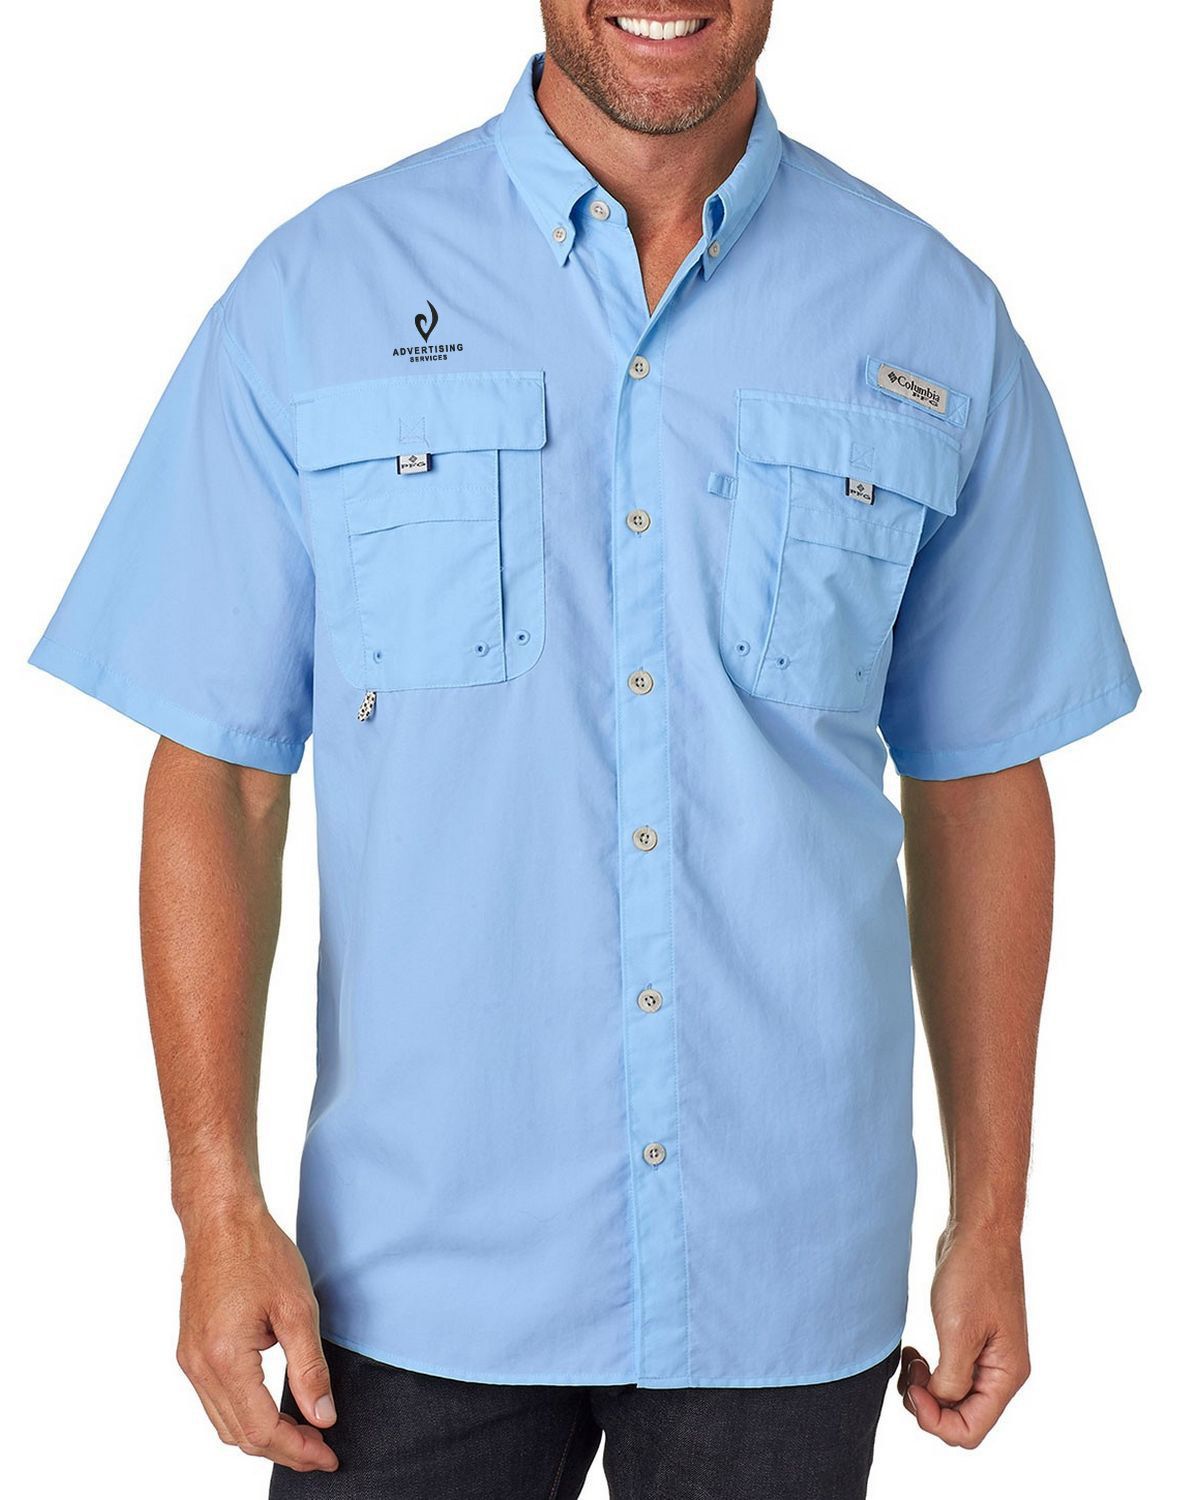 3 Columbia Men's Bahama? II Short-Sleeve Fishing Shirts - Embroidered Personalization Available